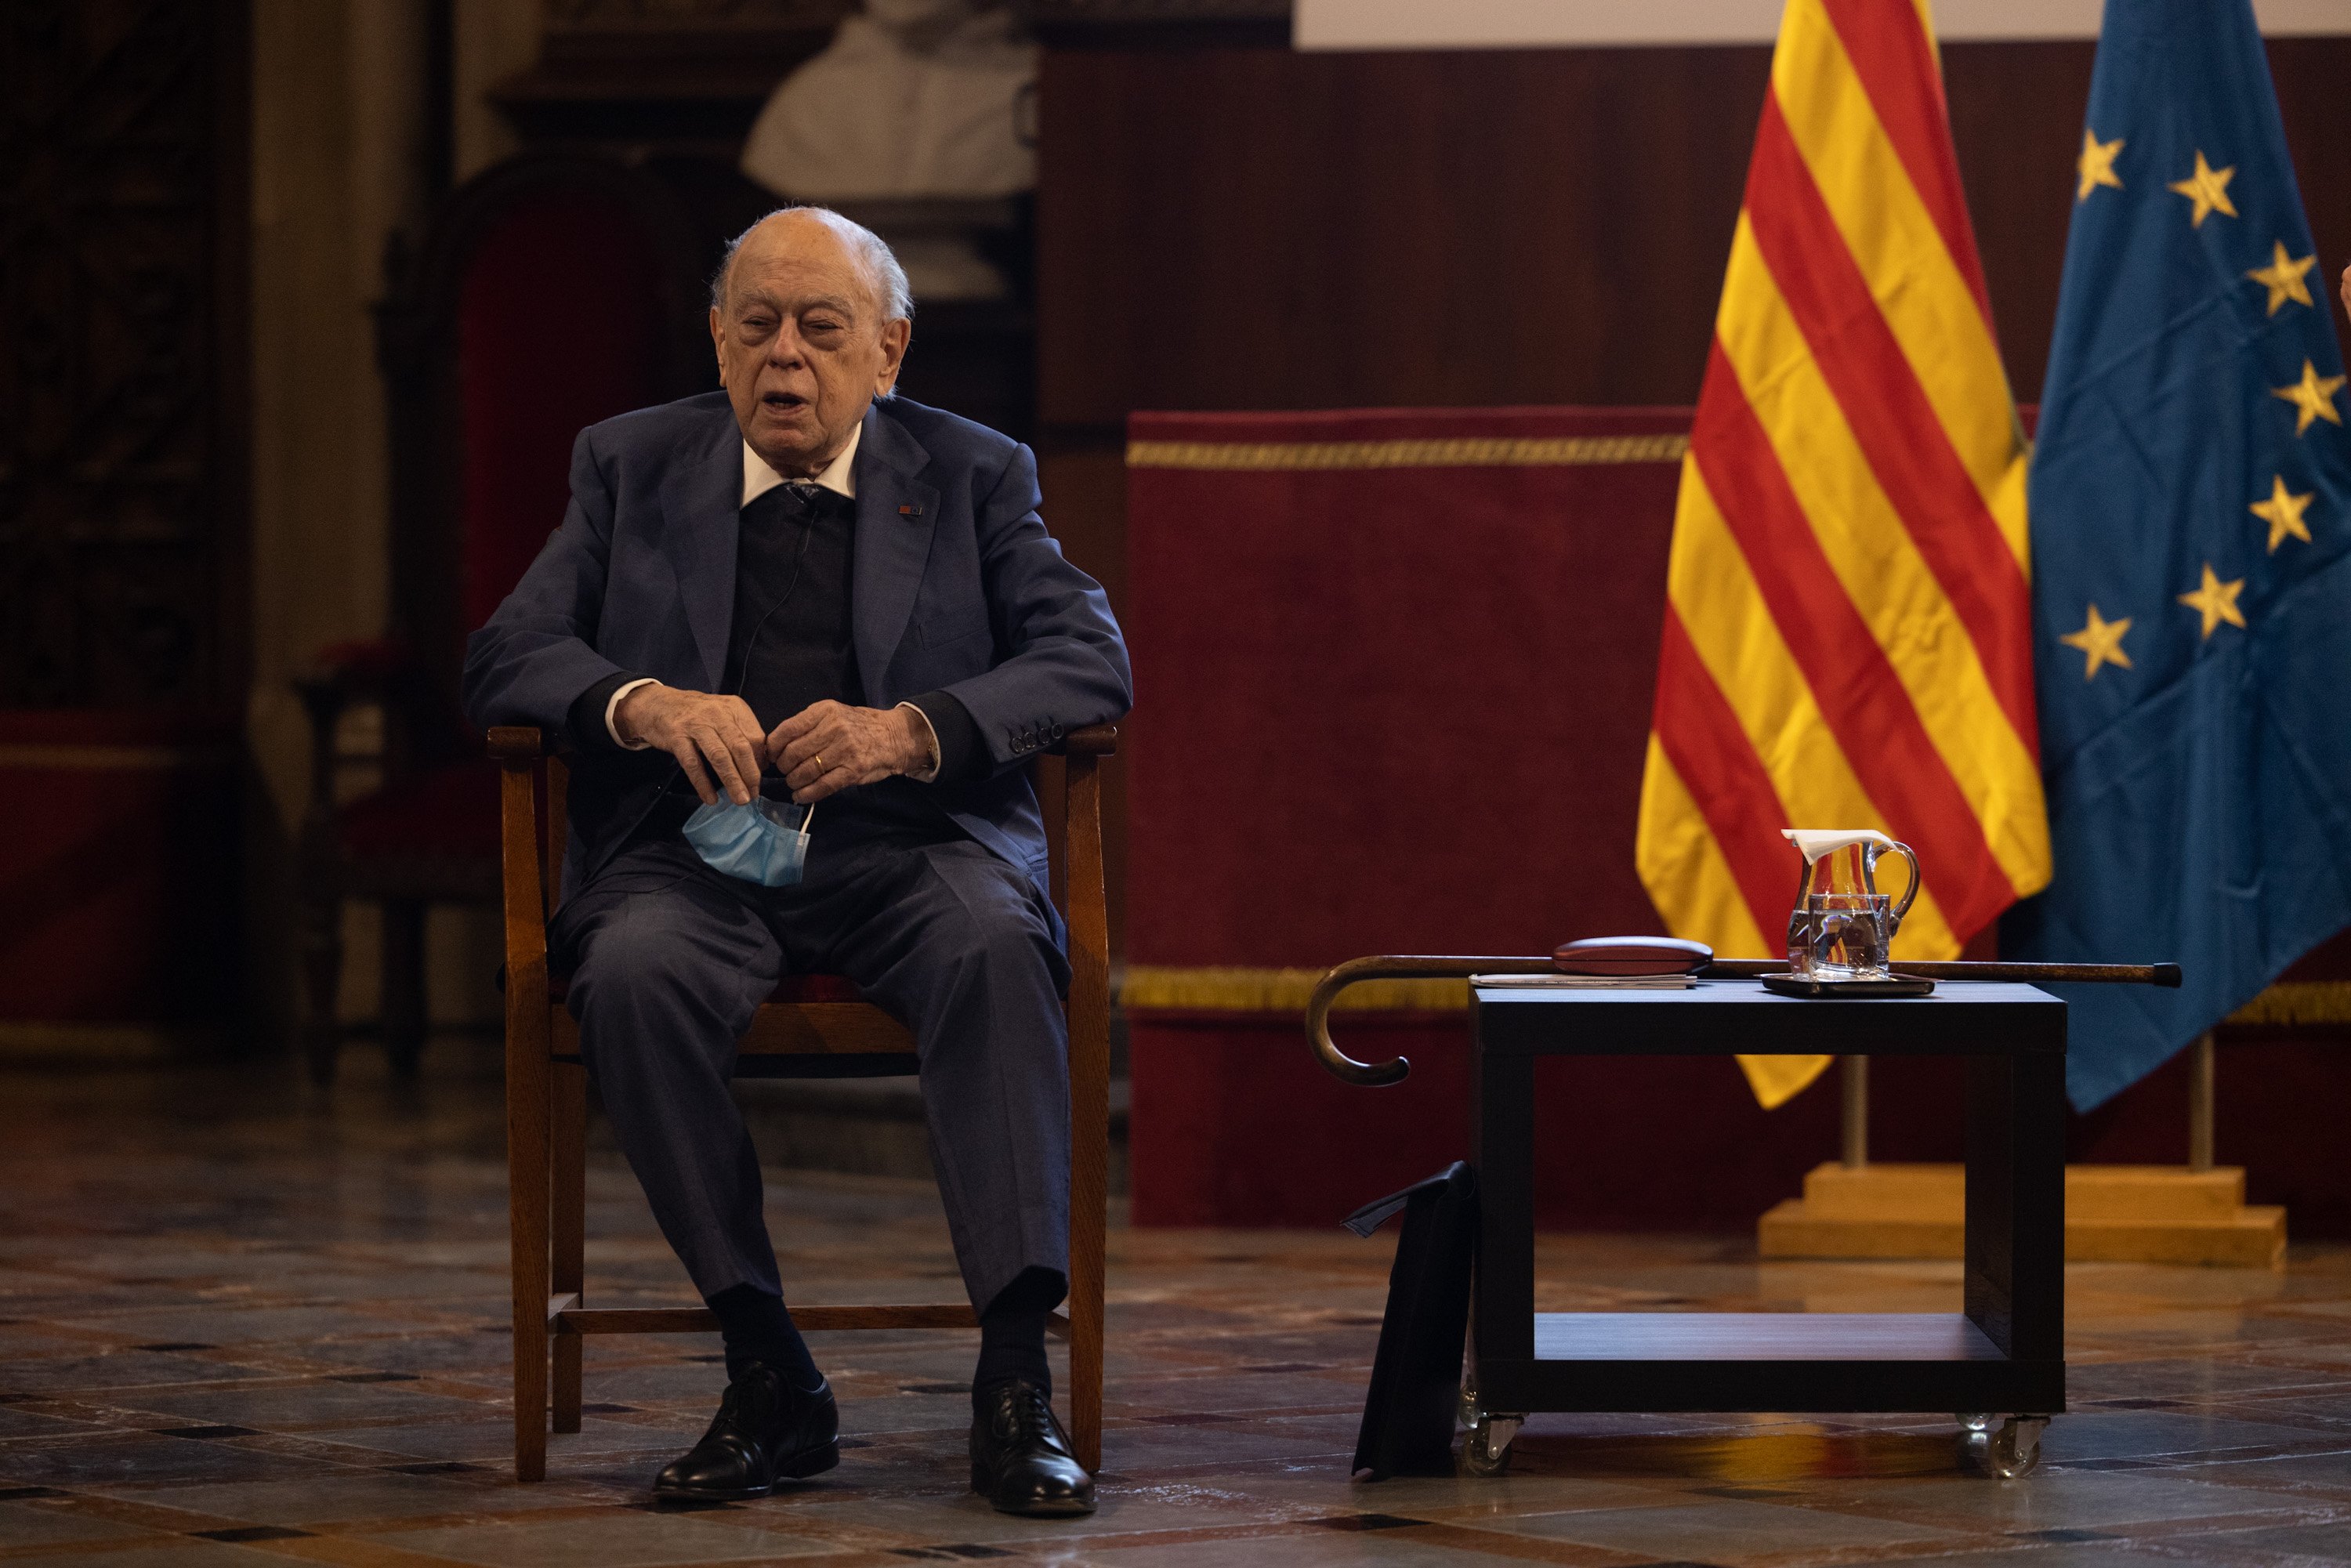 The recognition of Jordi Pujol divides the Catalan government